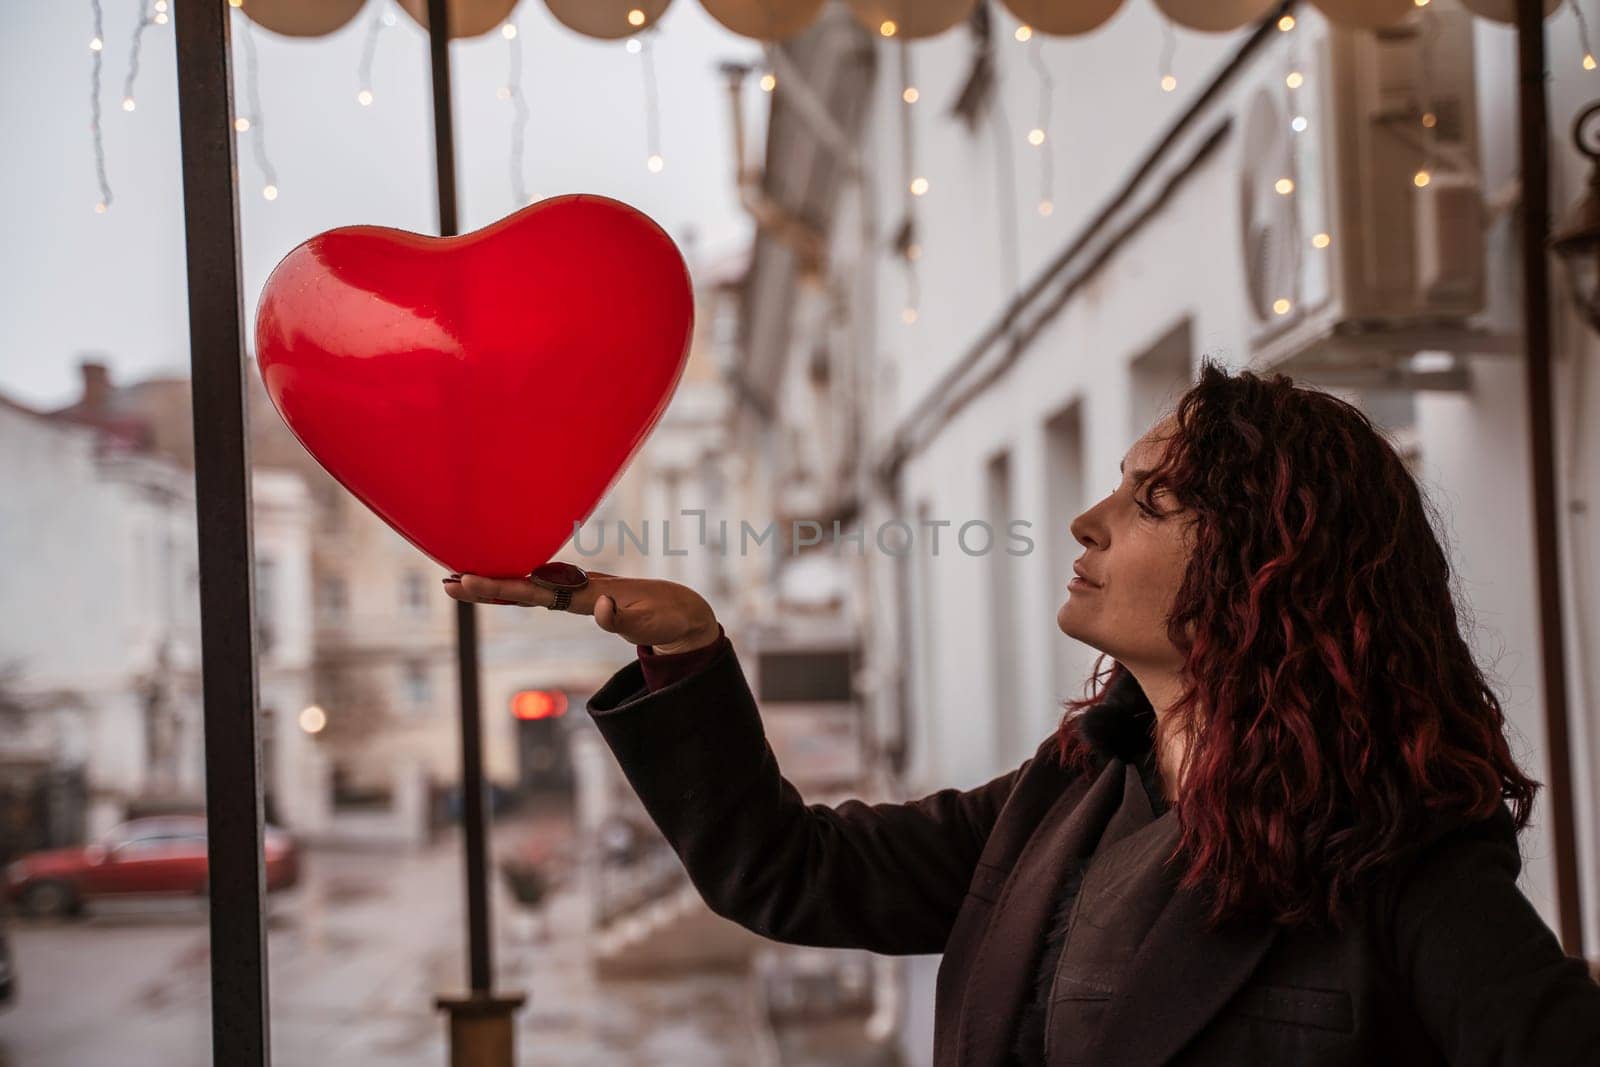 A woman holding a red heart balloon. The woman is wearing a black coat and has red hair. The scene is set in a city street with cars and a building in the background. by Matiunina